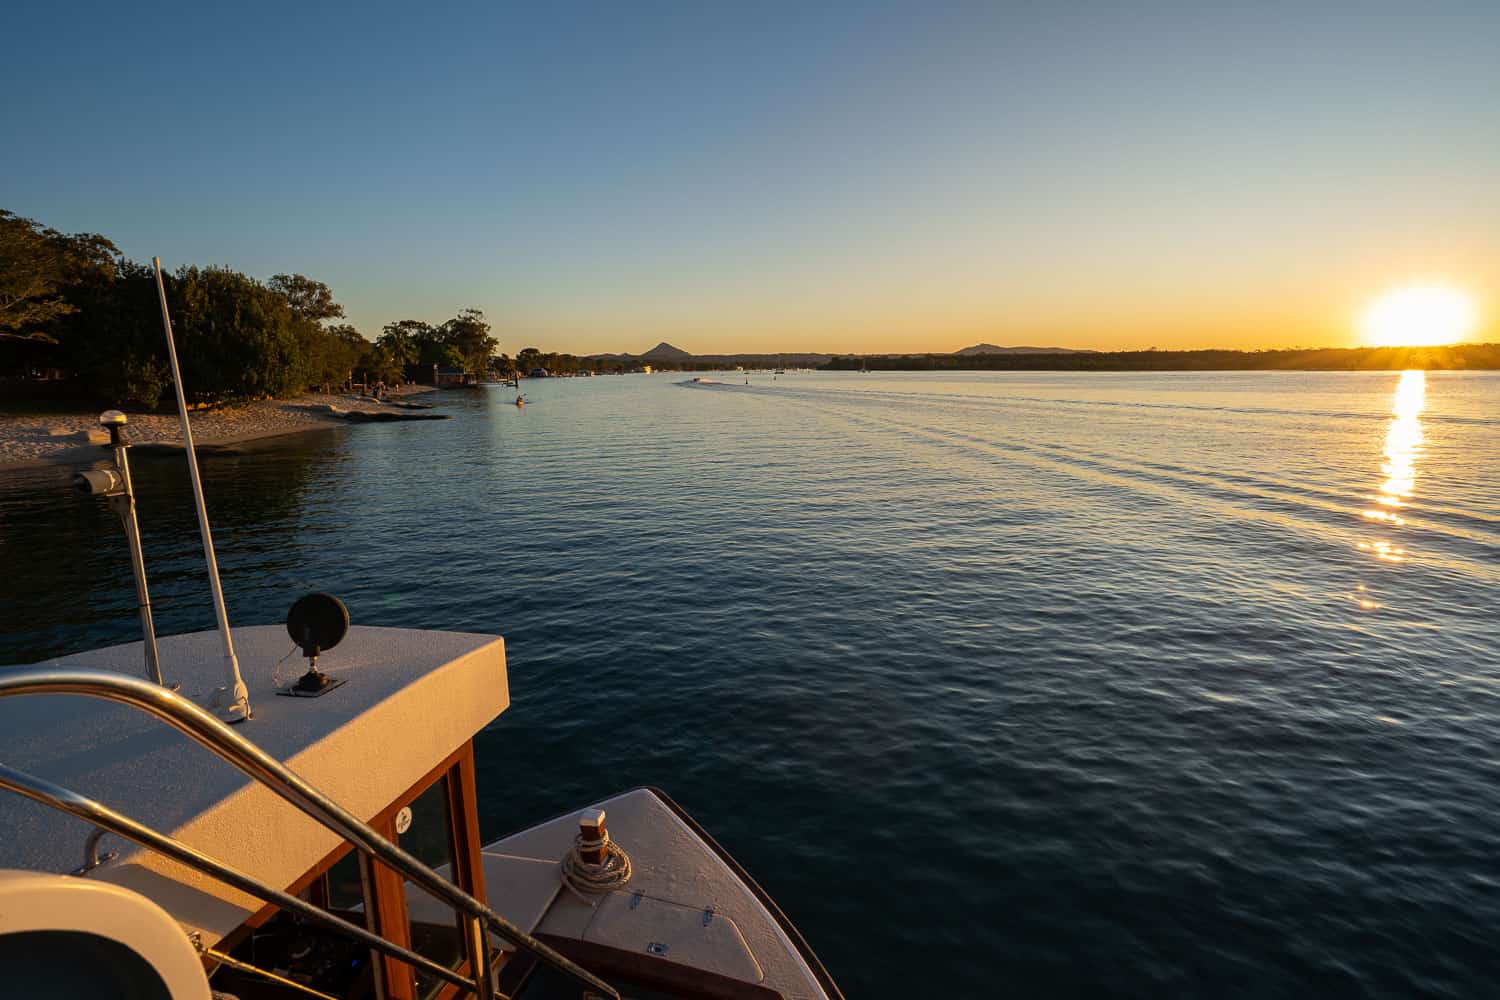 Sunset view from a ferry, Noosa, Queensland, Australia